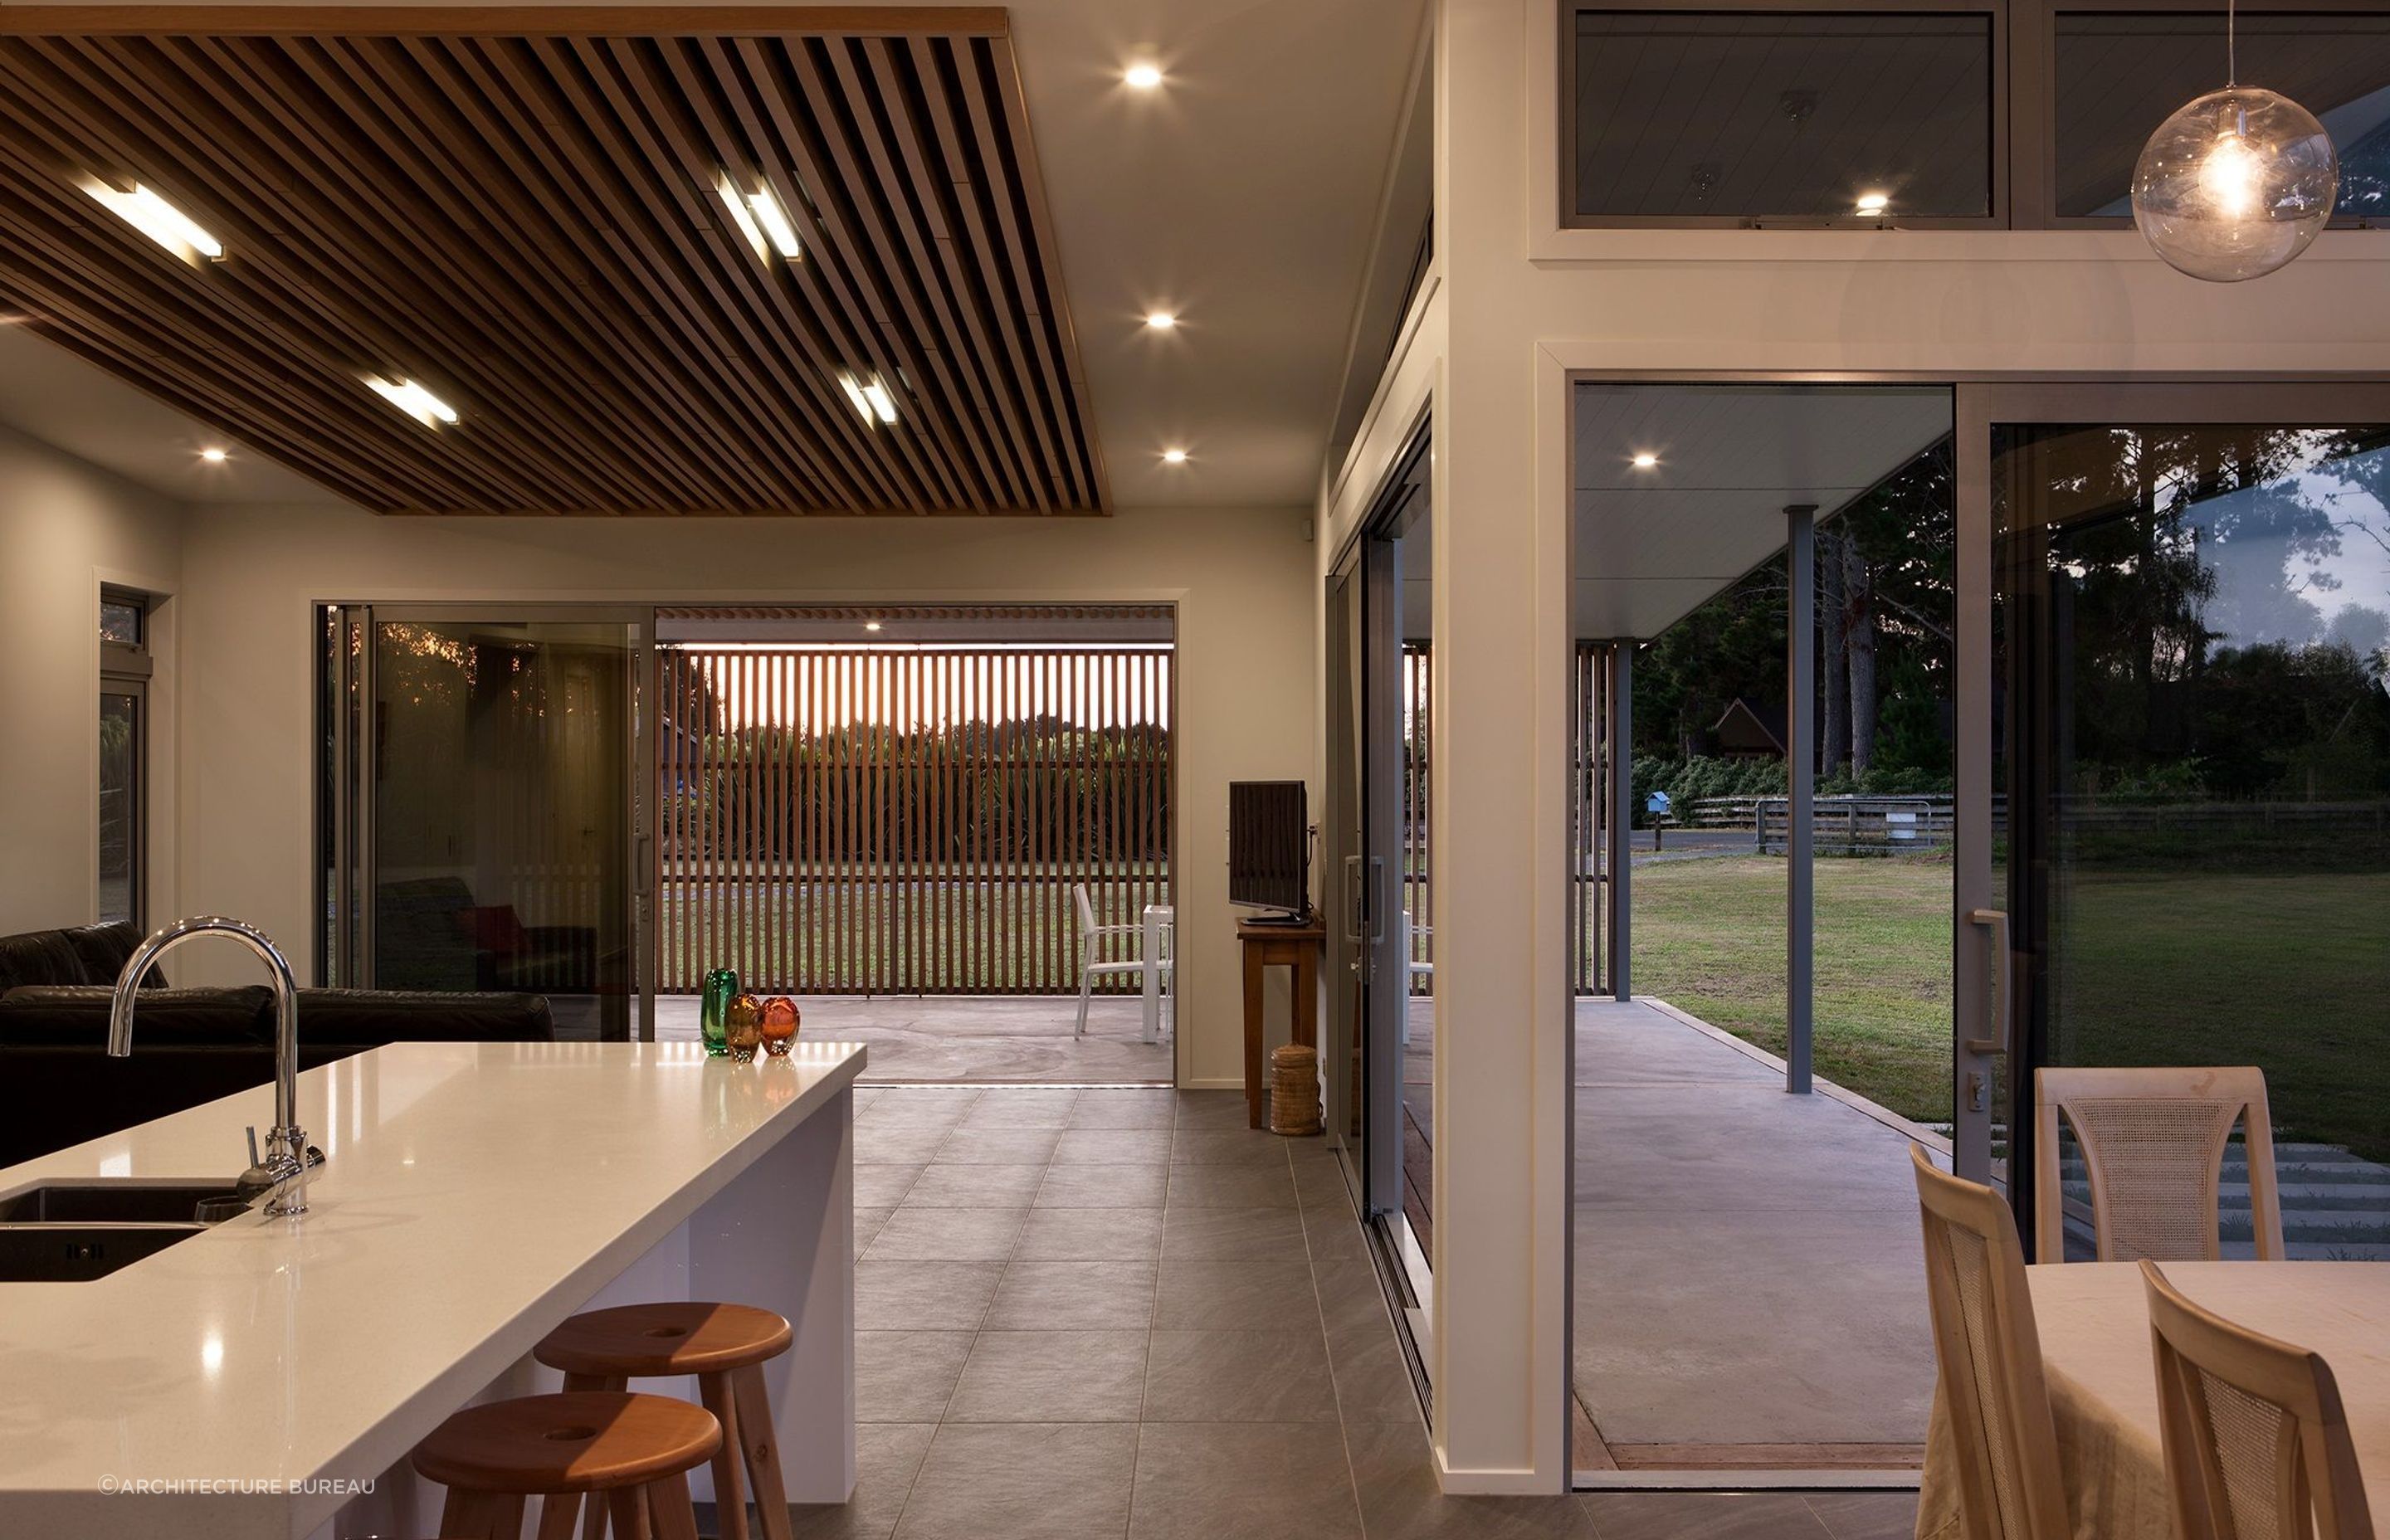 Indoor-outdoor flow is often a strong feature of contemporary home design.